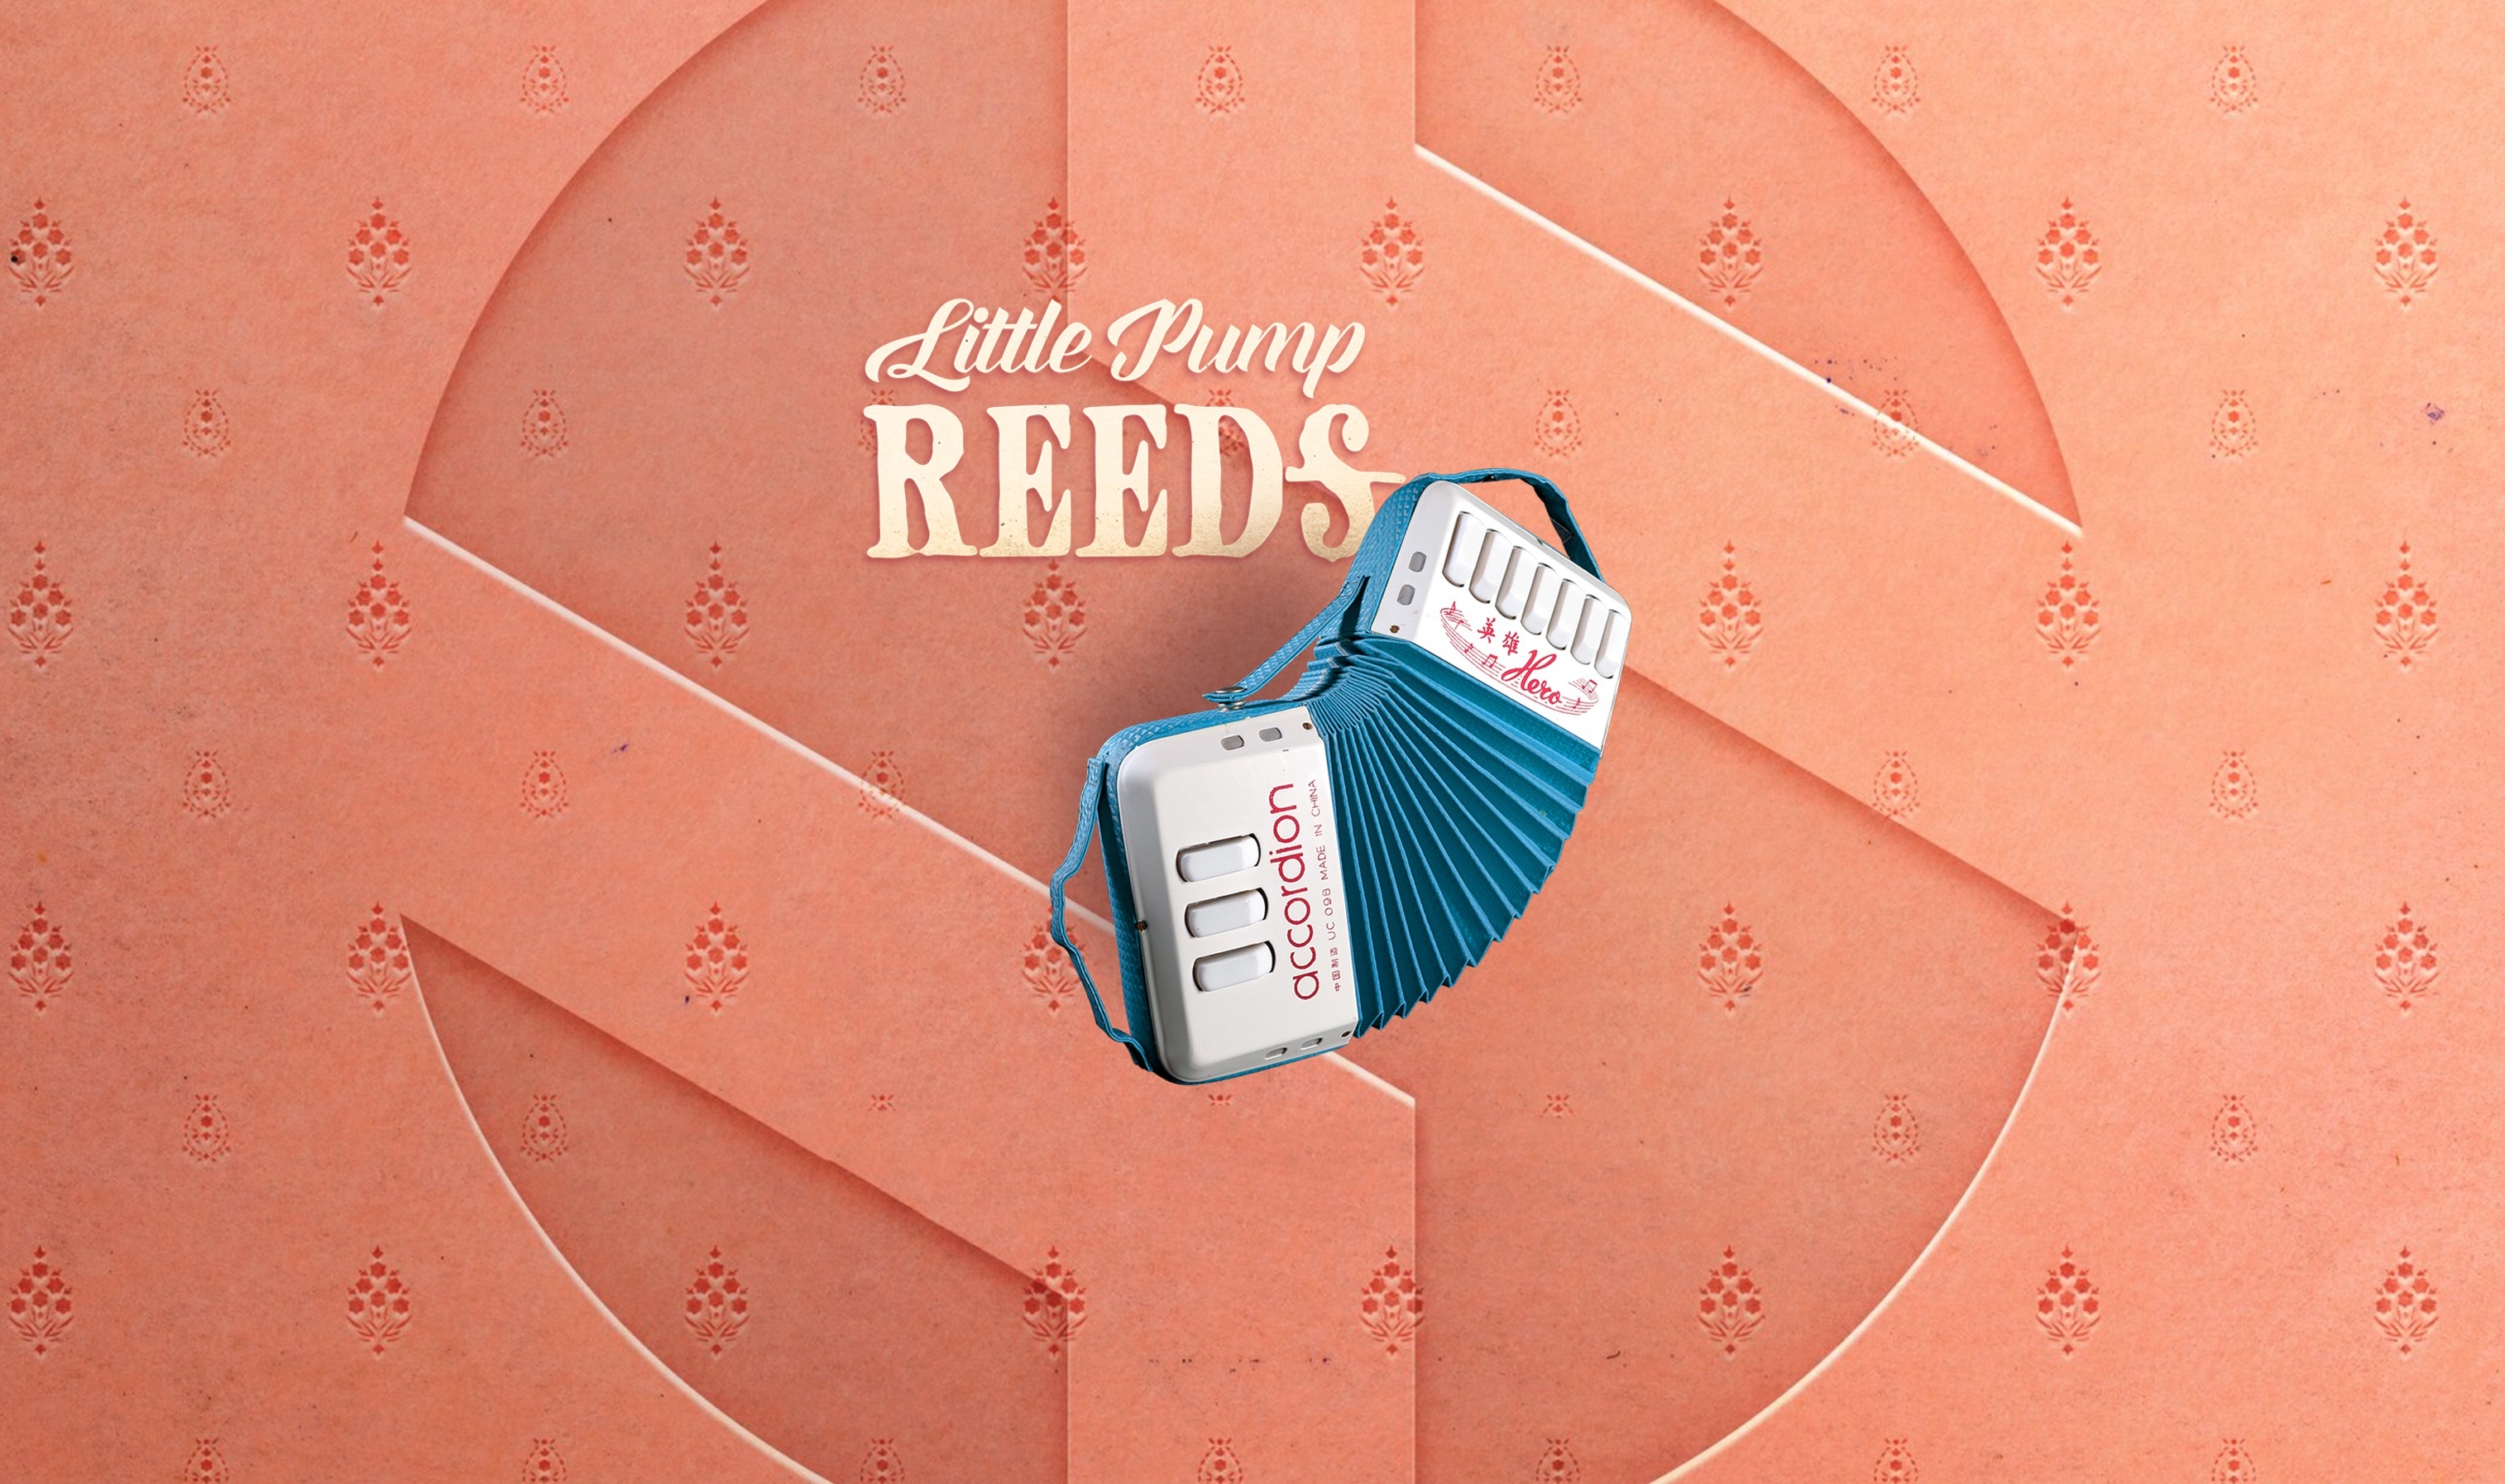 Little Pump Reeds V2 Released by Soundiron Featured